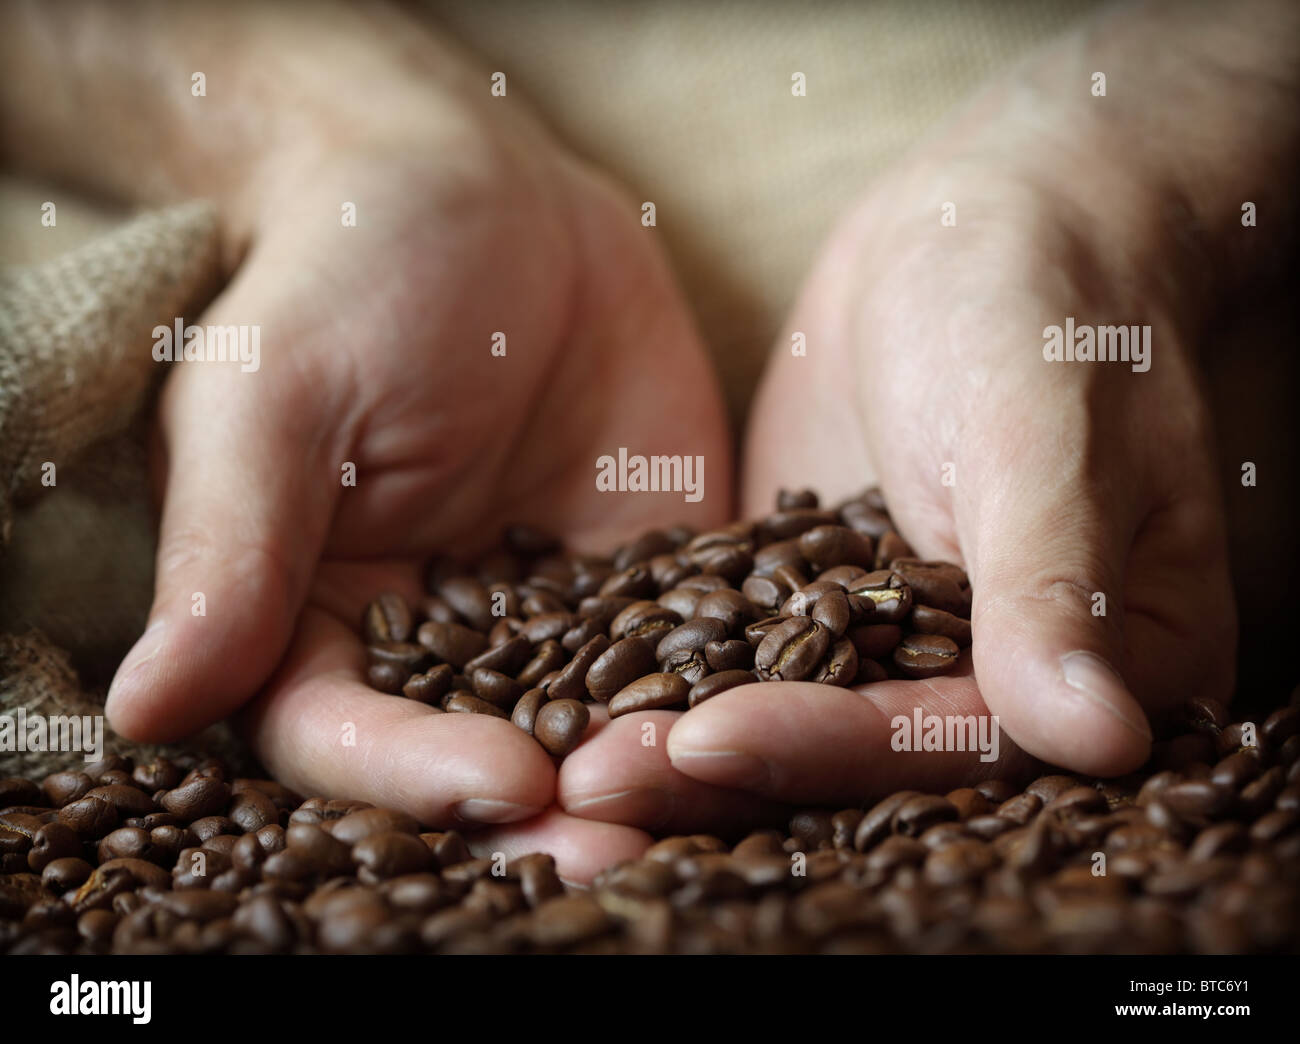 Hand holding coffee beans Stock Photo